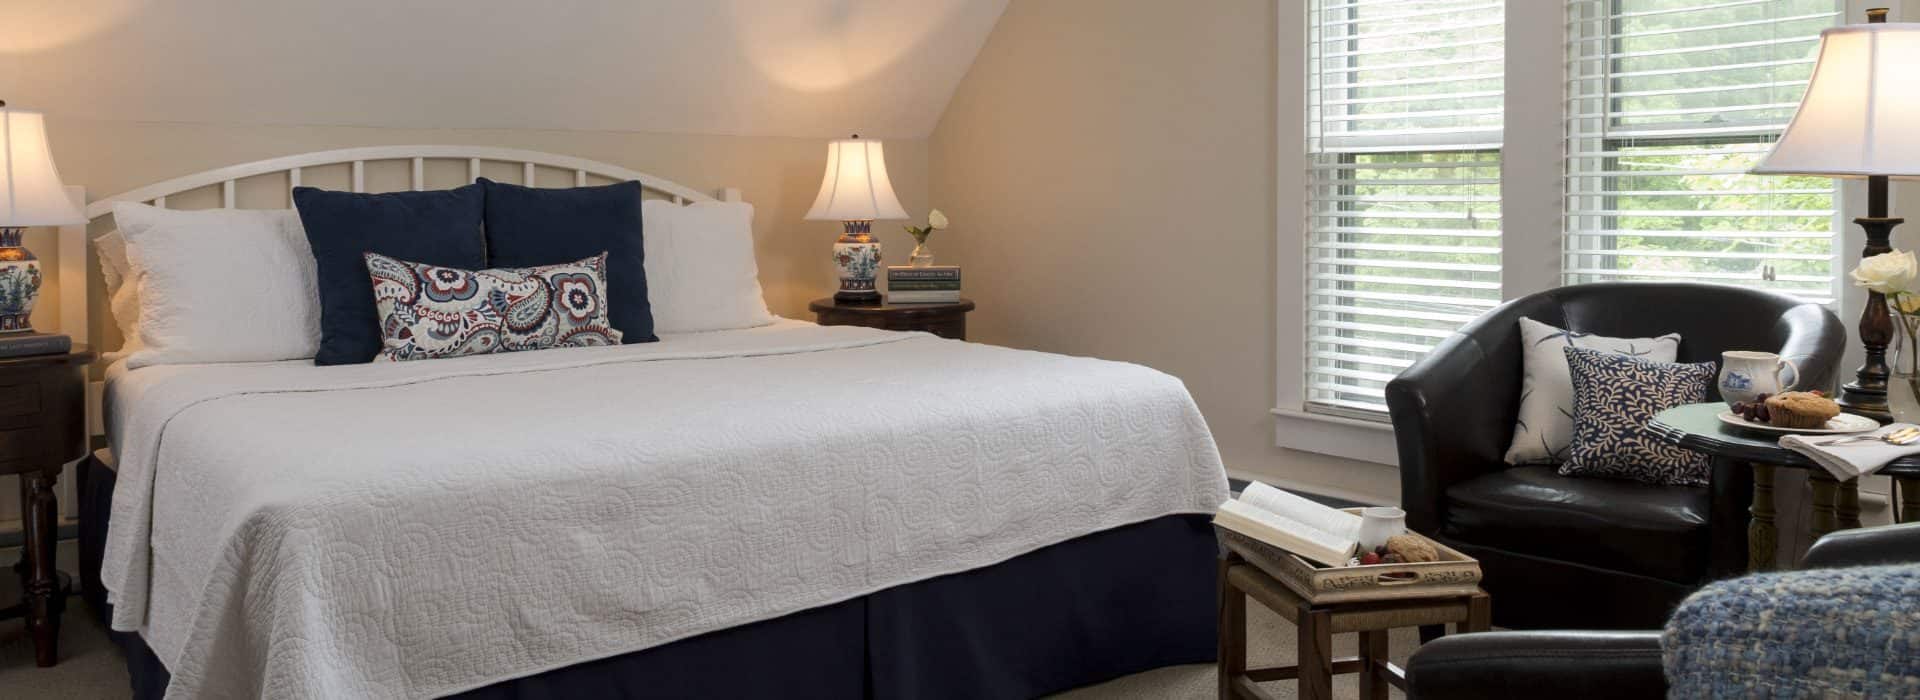 Bedroom with light cream walls, white trim, white headboard, white and navy bedding, sitting area, and large windows